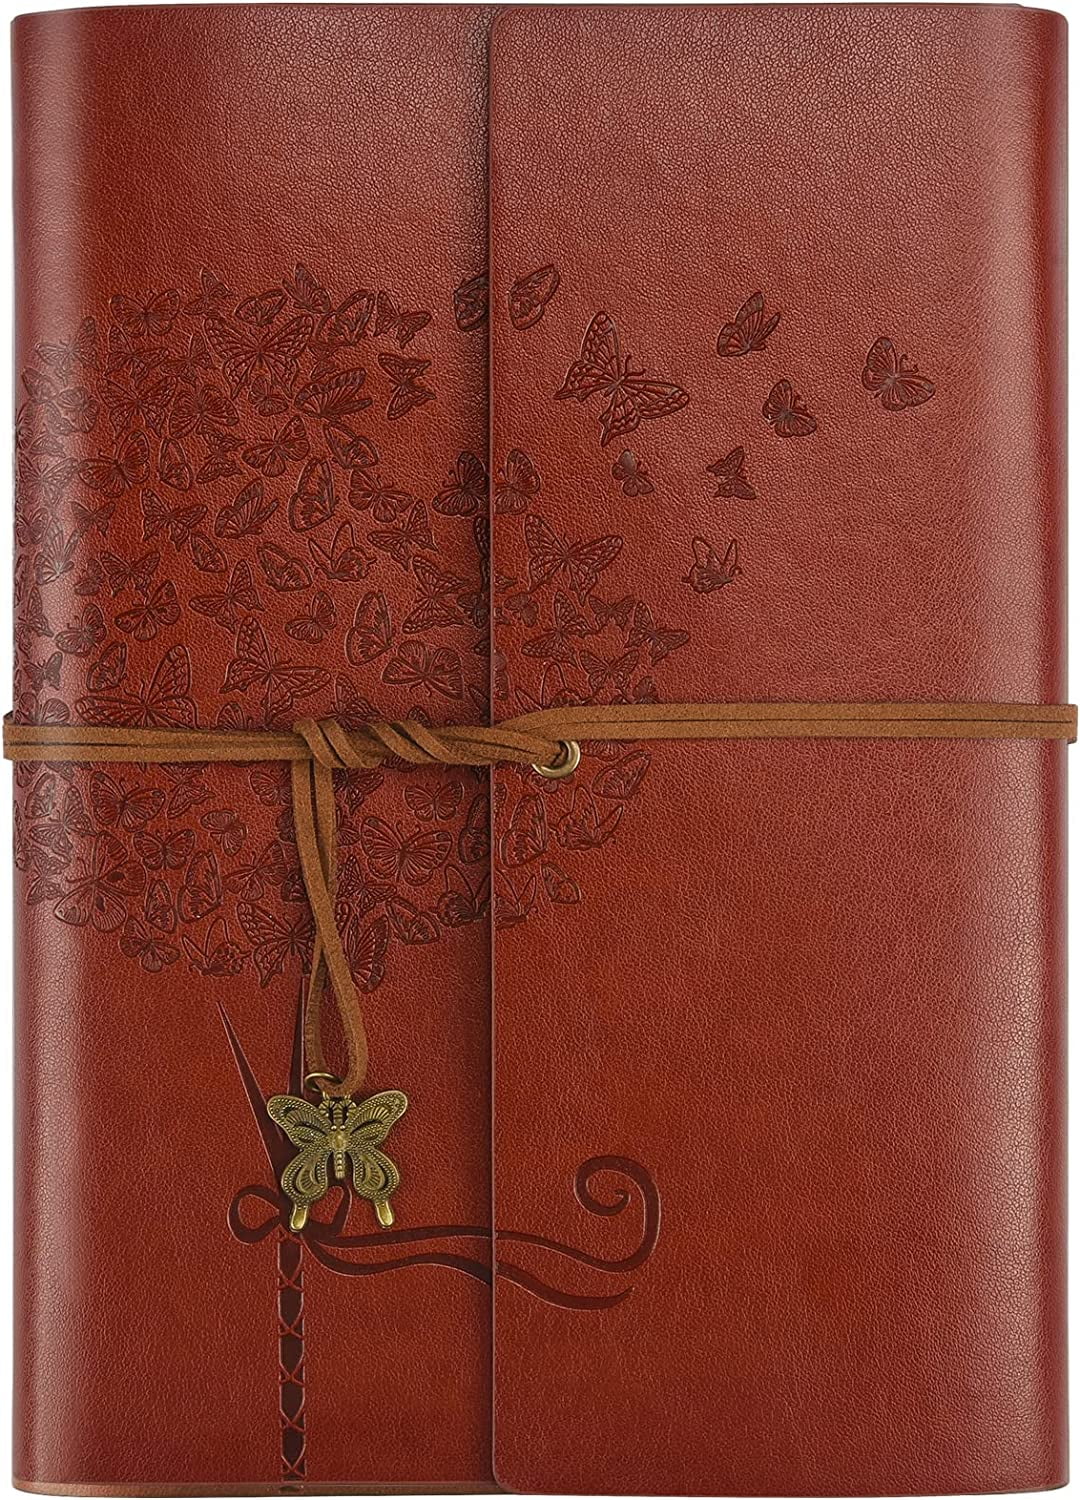 A5 Leather Journal notebook for Men and Women with Pen - Brilliant